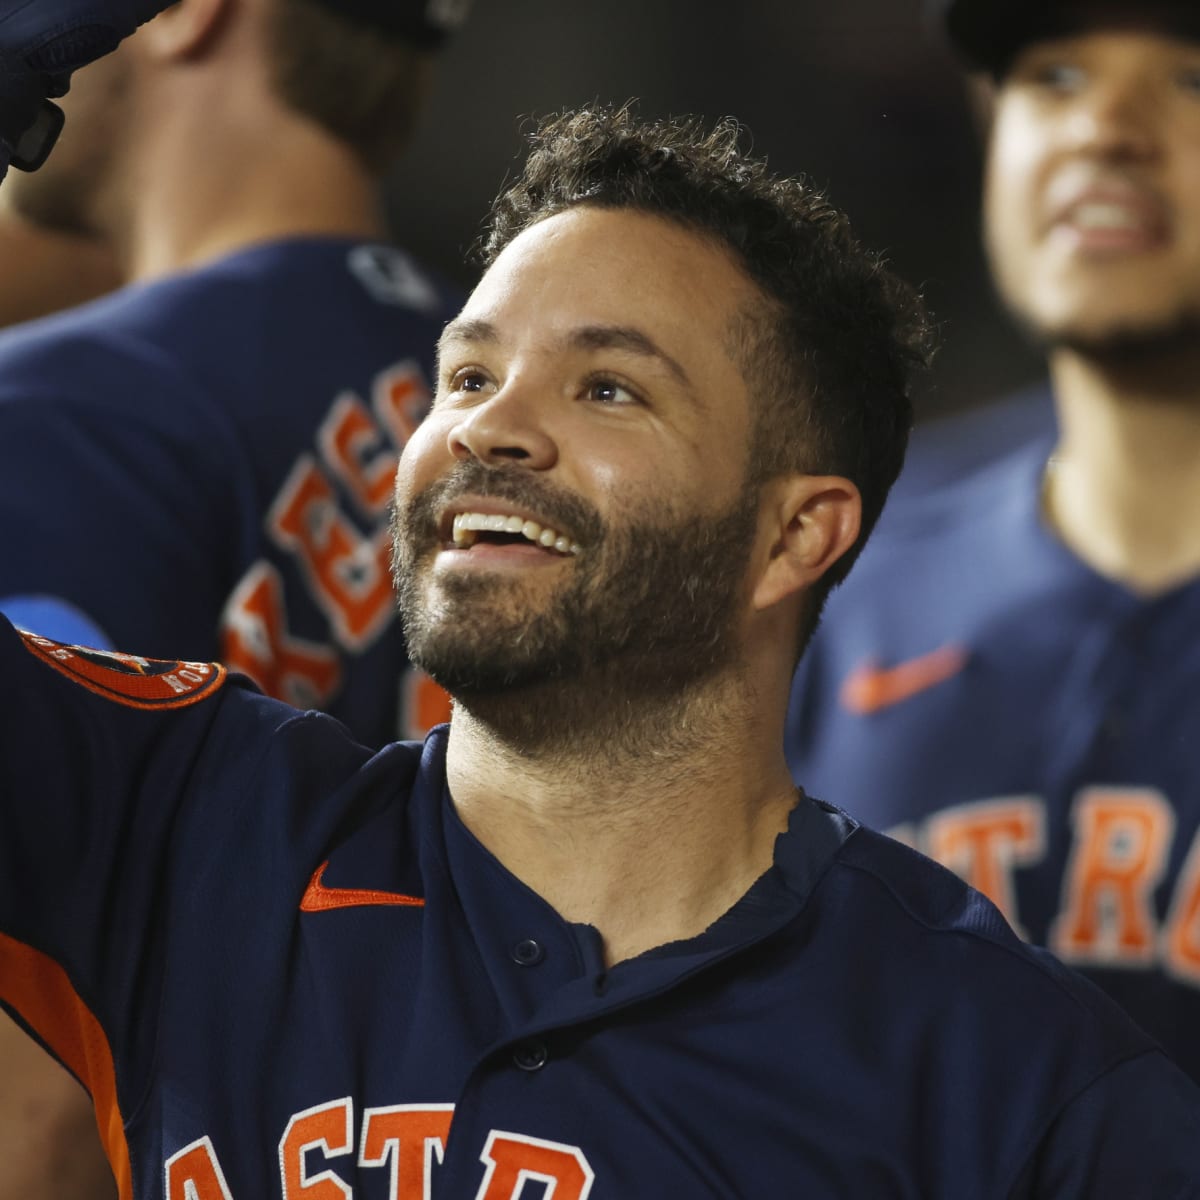 Astros' Altuve all smiles after 3-hit performance